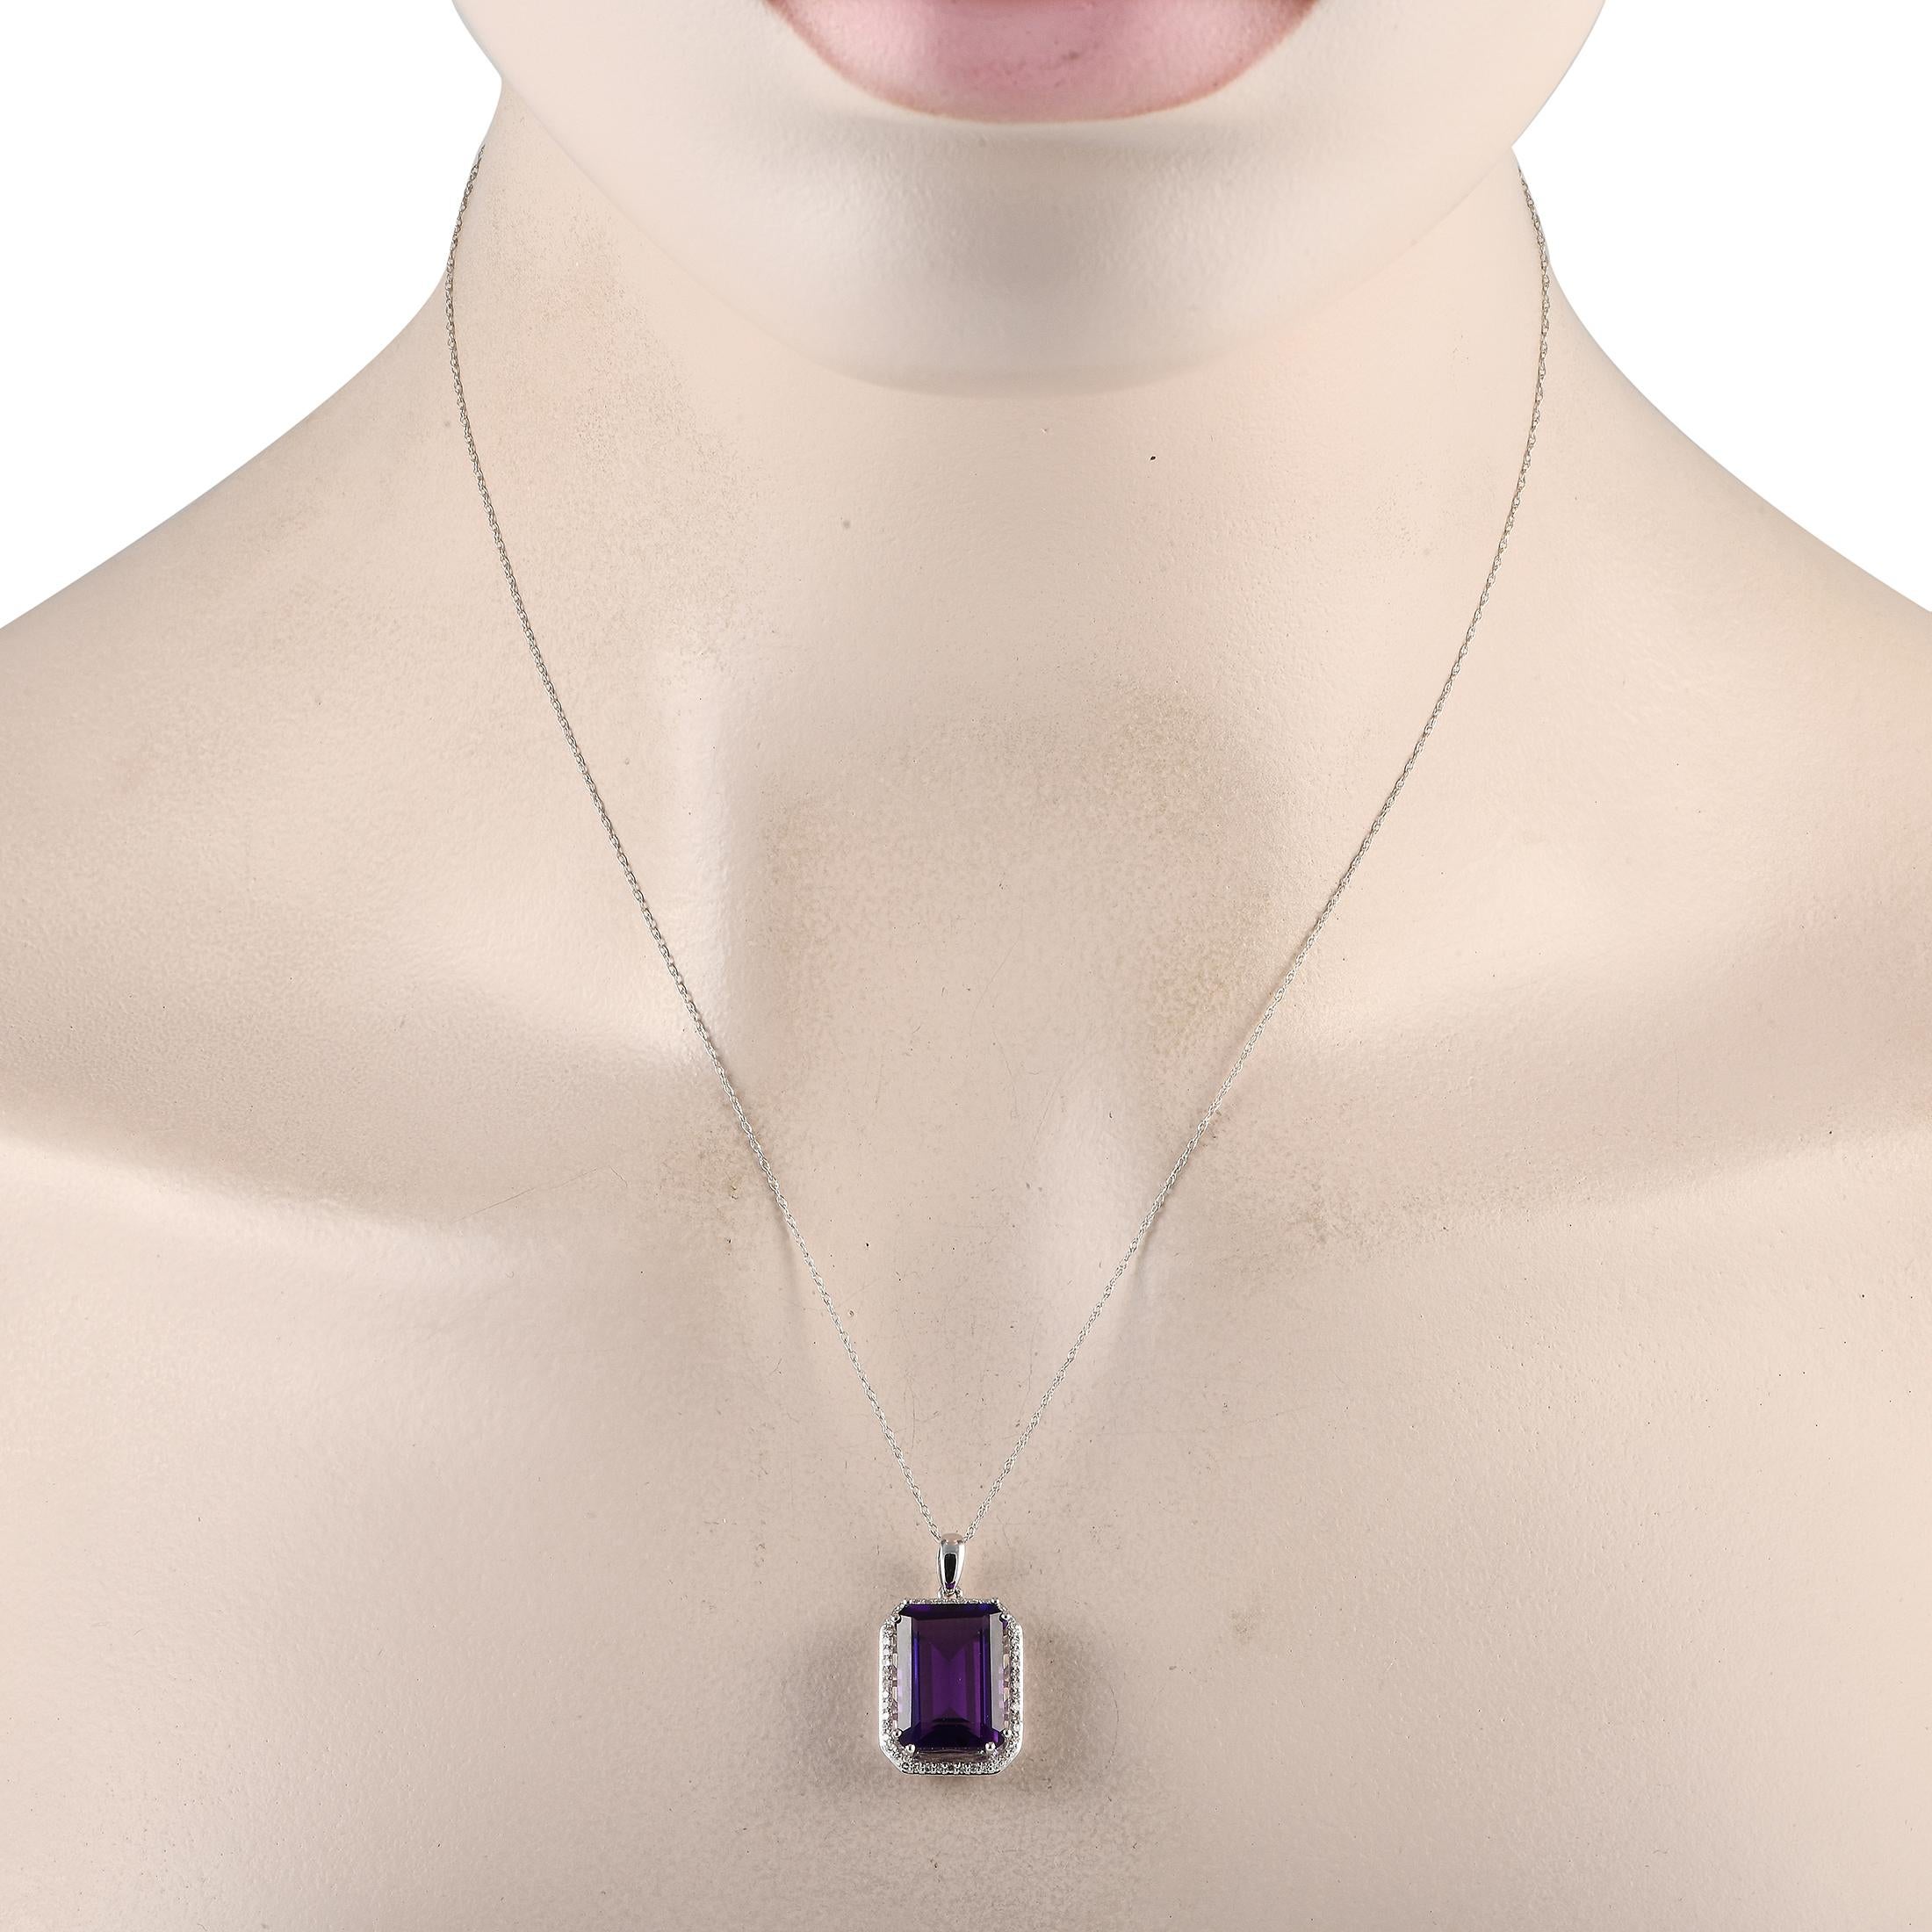 A bold Amethyst gemstone serves as a stunning focal point on this elegant necklace. Crafted from 14K White Gold, this pieces pendant measures 1.0 long by 0.50 wide and is suspended from a delicate 18 chain. Sparkling Diamonds with a total weight of